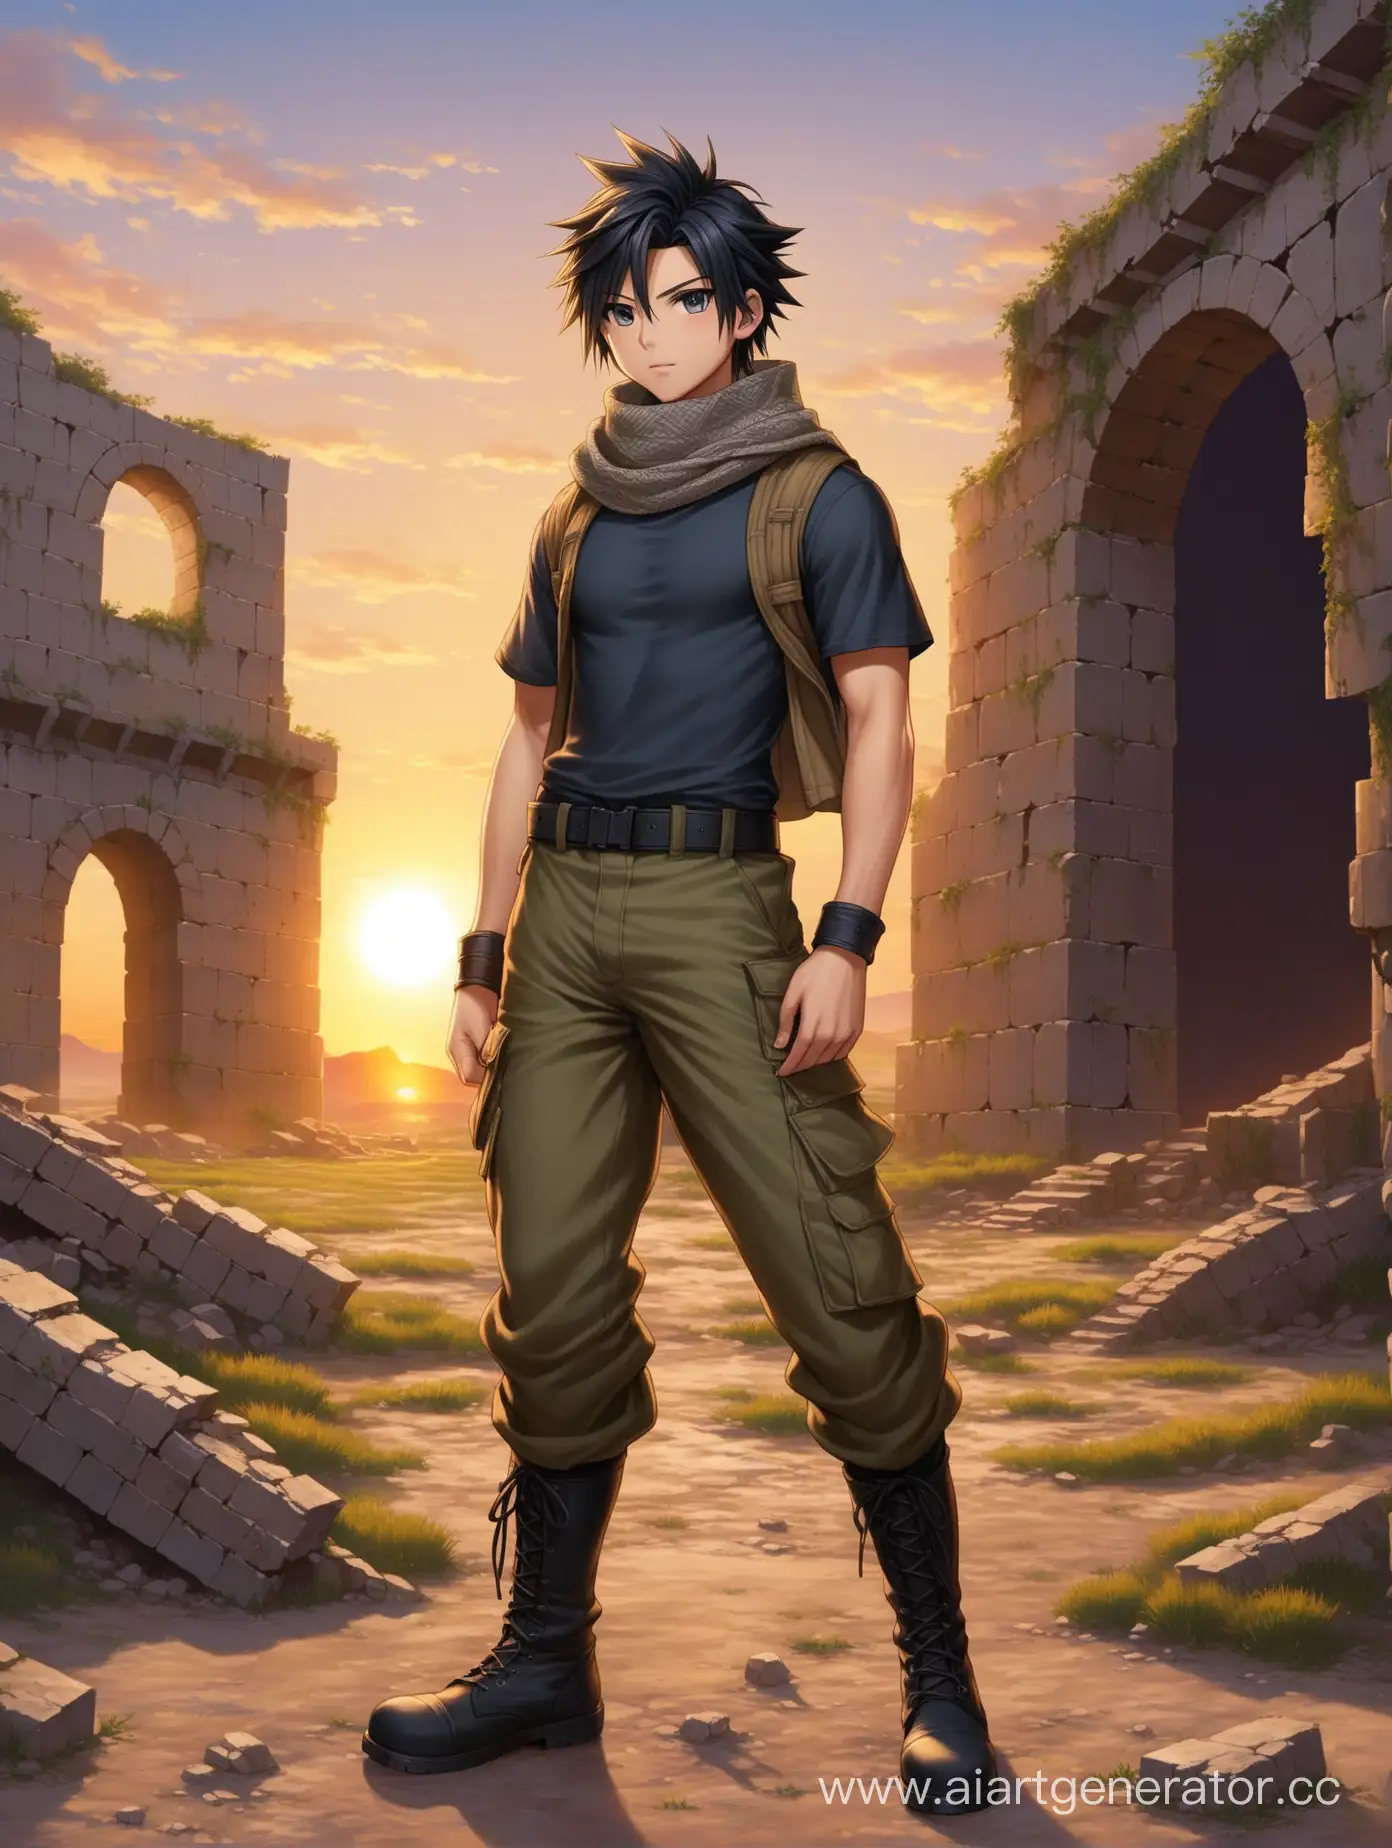 Heroic-Young-Warrior-Amidst-Sunset-Ruins